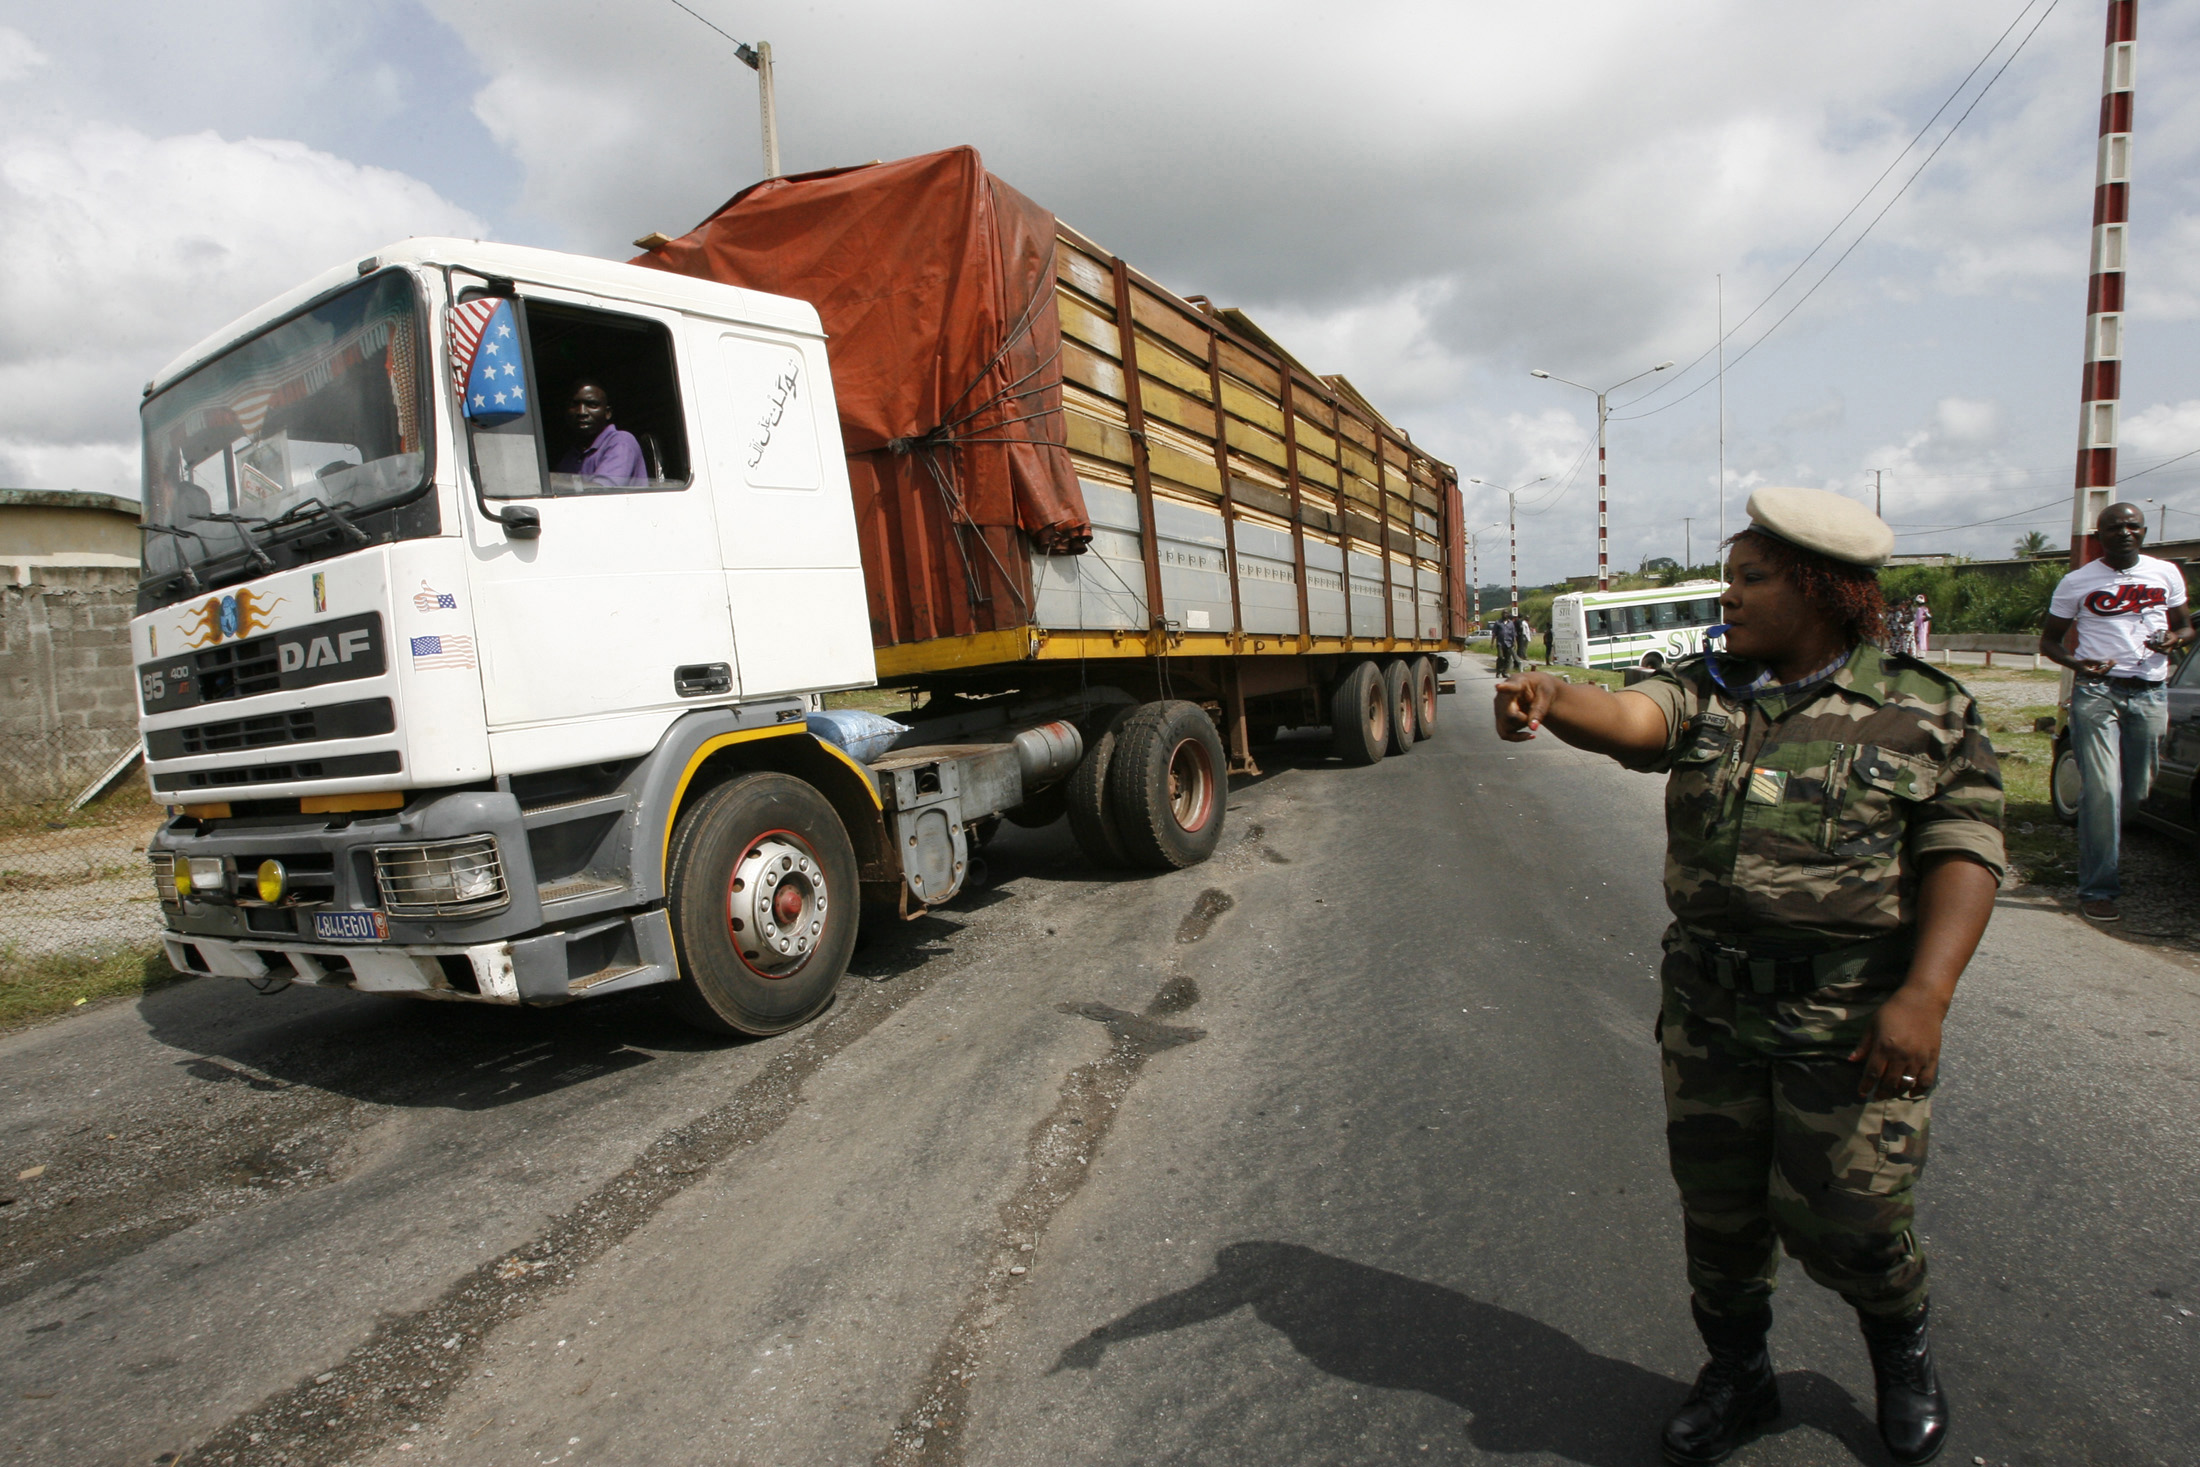 A customs officer redirects a truck at the Yopougon checkpoint in Abidjan June 2, 2008. Ivory Coast authorities recently launched a campaign to crack down on racketeering on the roads and improve traffic.   REUTERS/Luc Gnago (IVORY COAST)